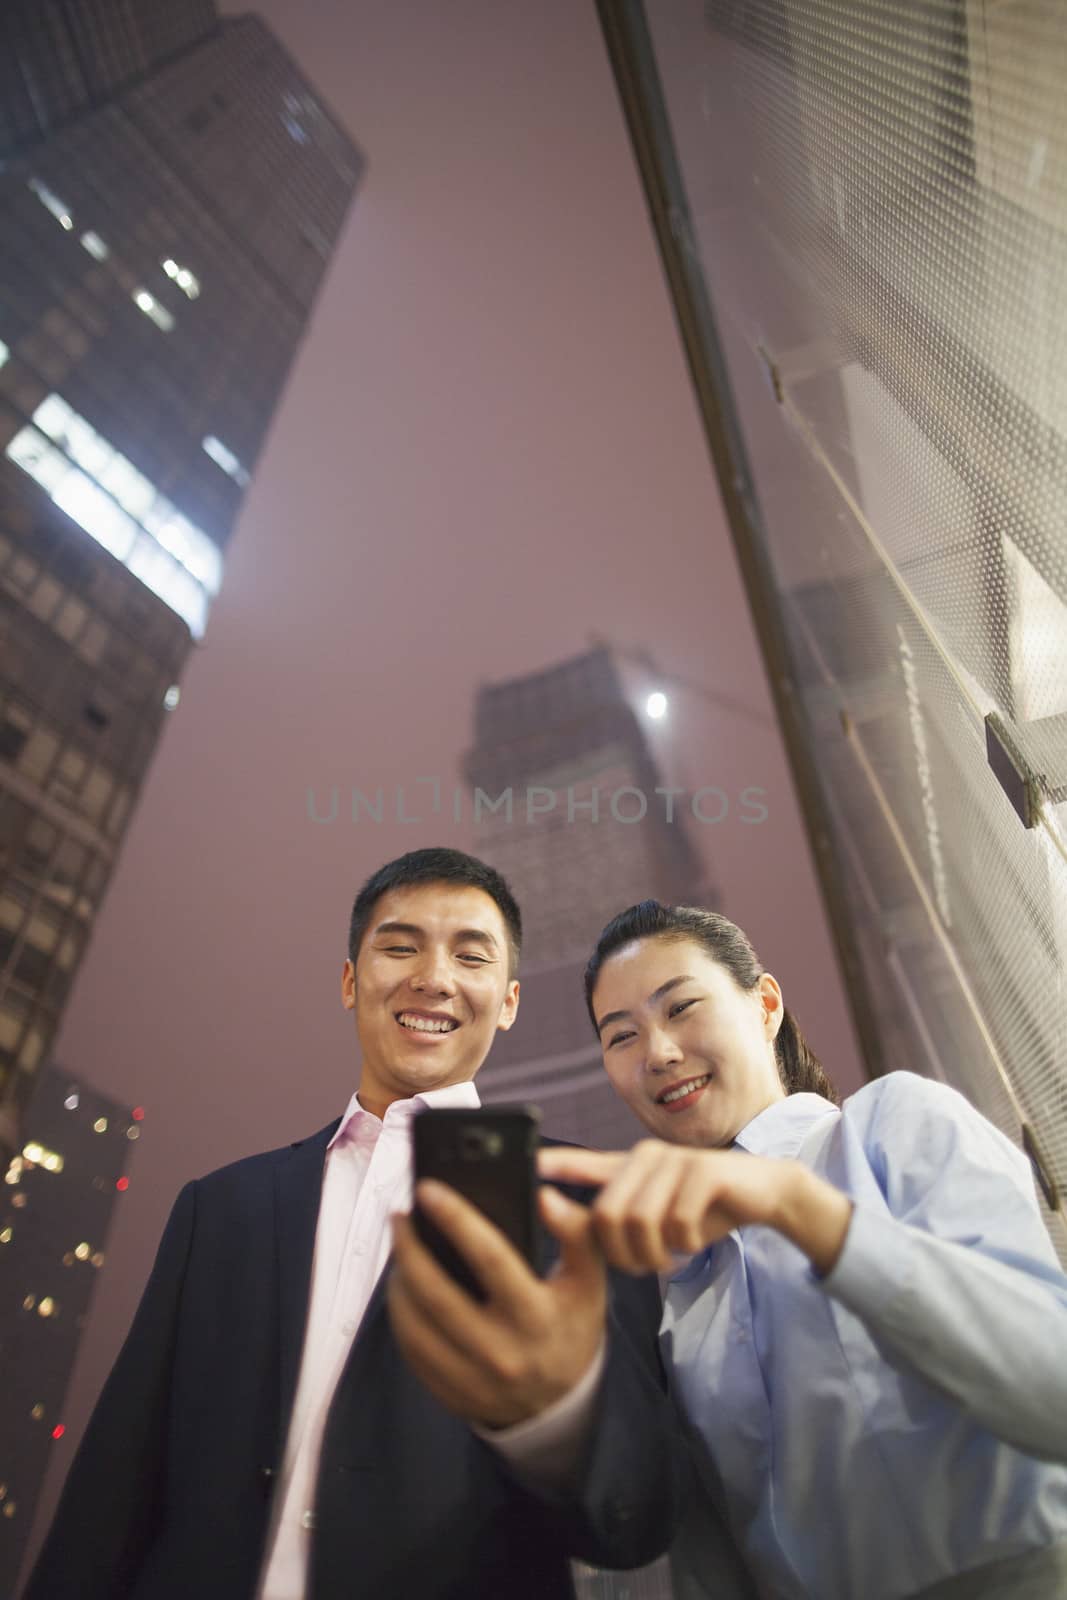 two business people smiling and looking at the phone